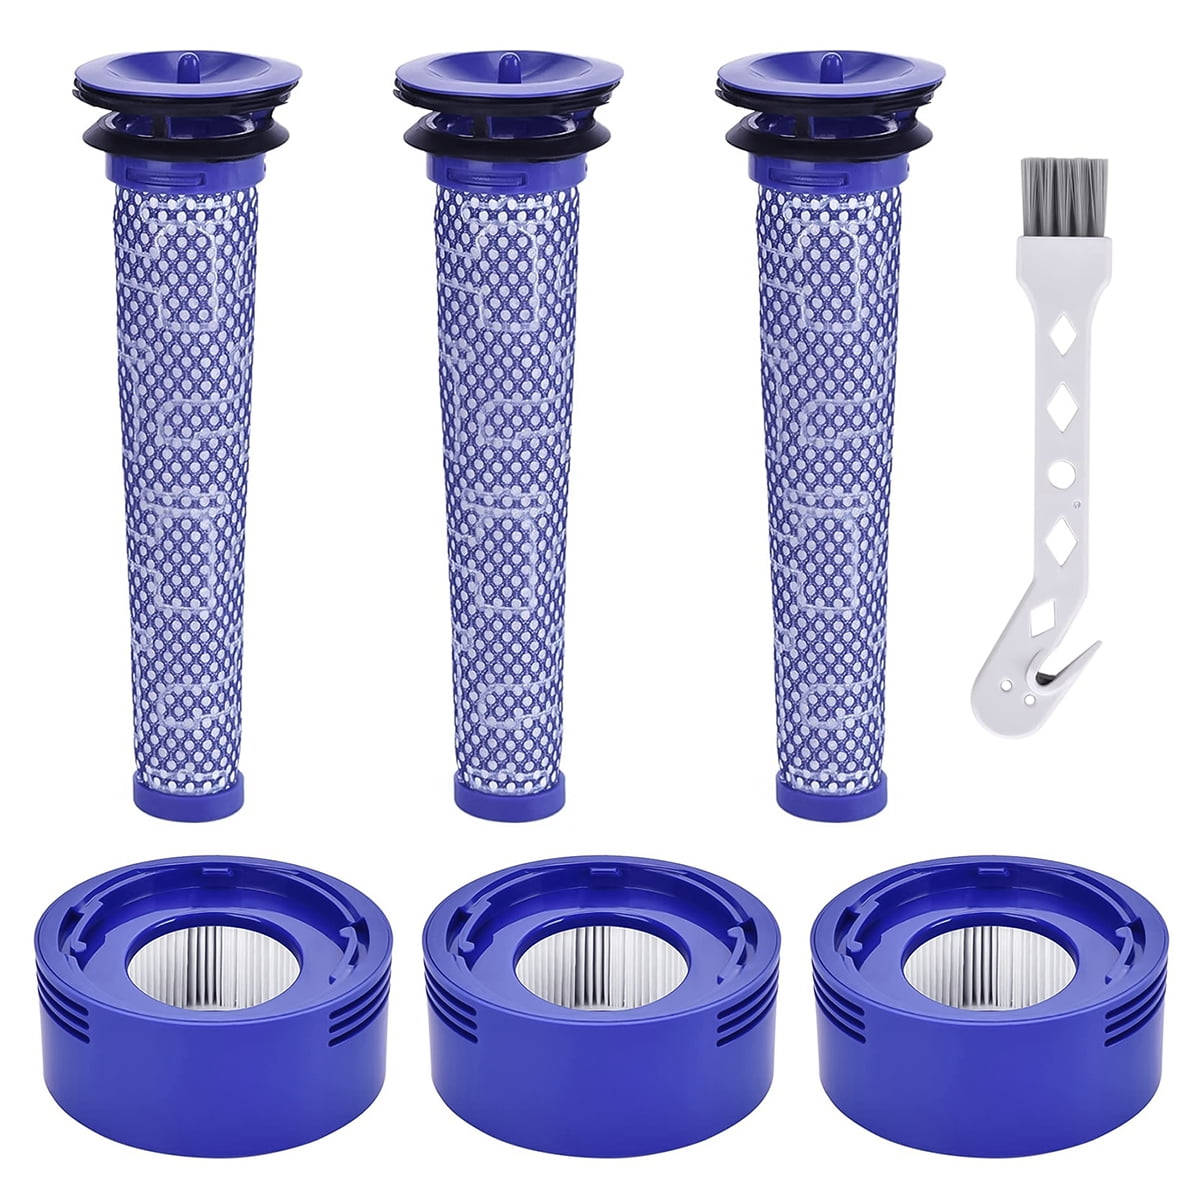 6 Pack Replacement Kit for Dyson V7 V8 Animal and Absolute Vacuum